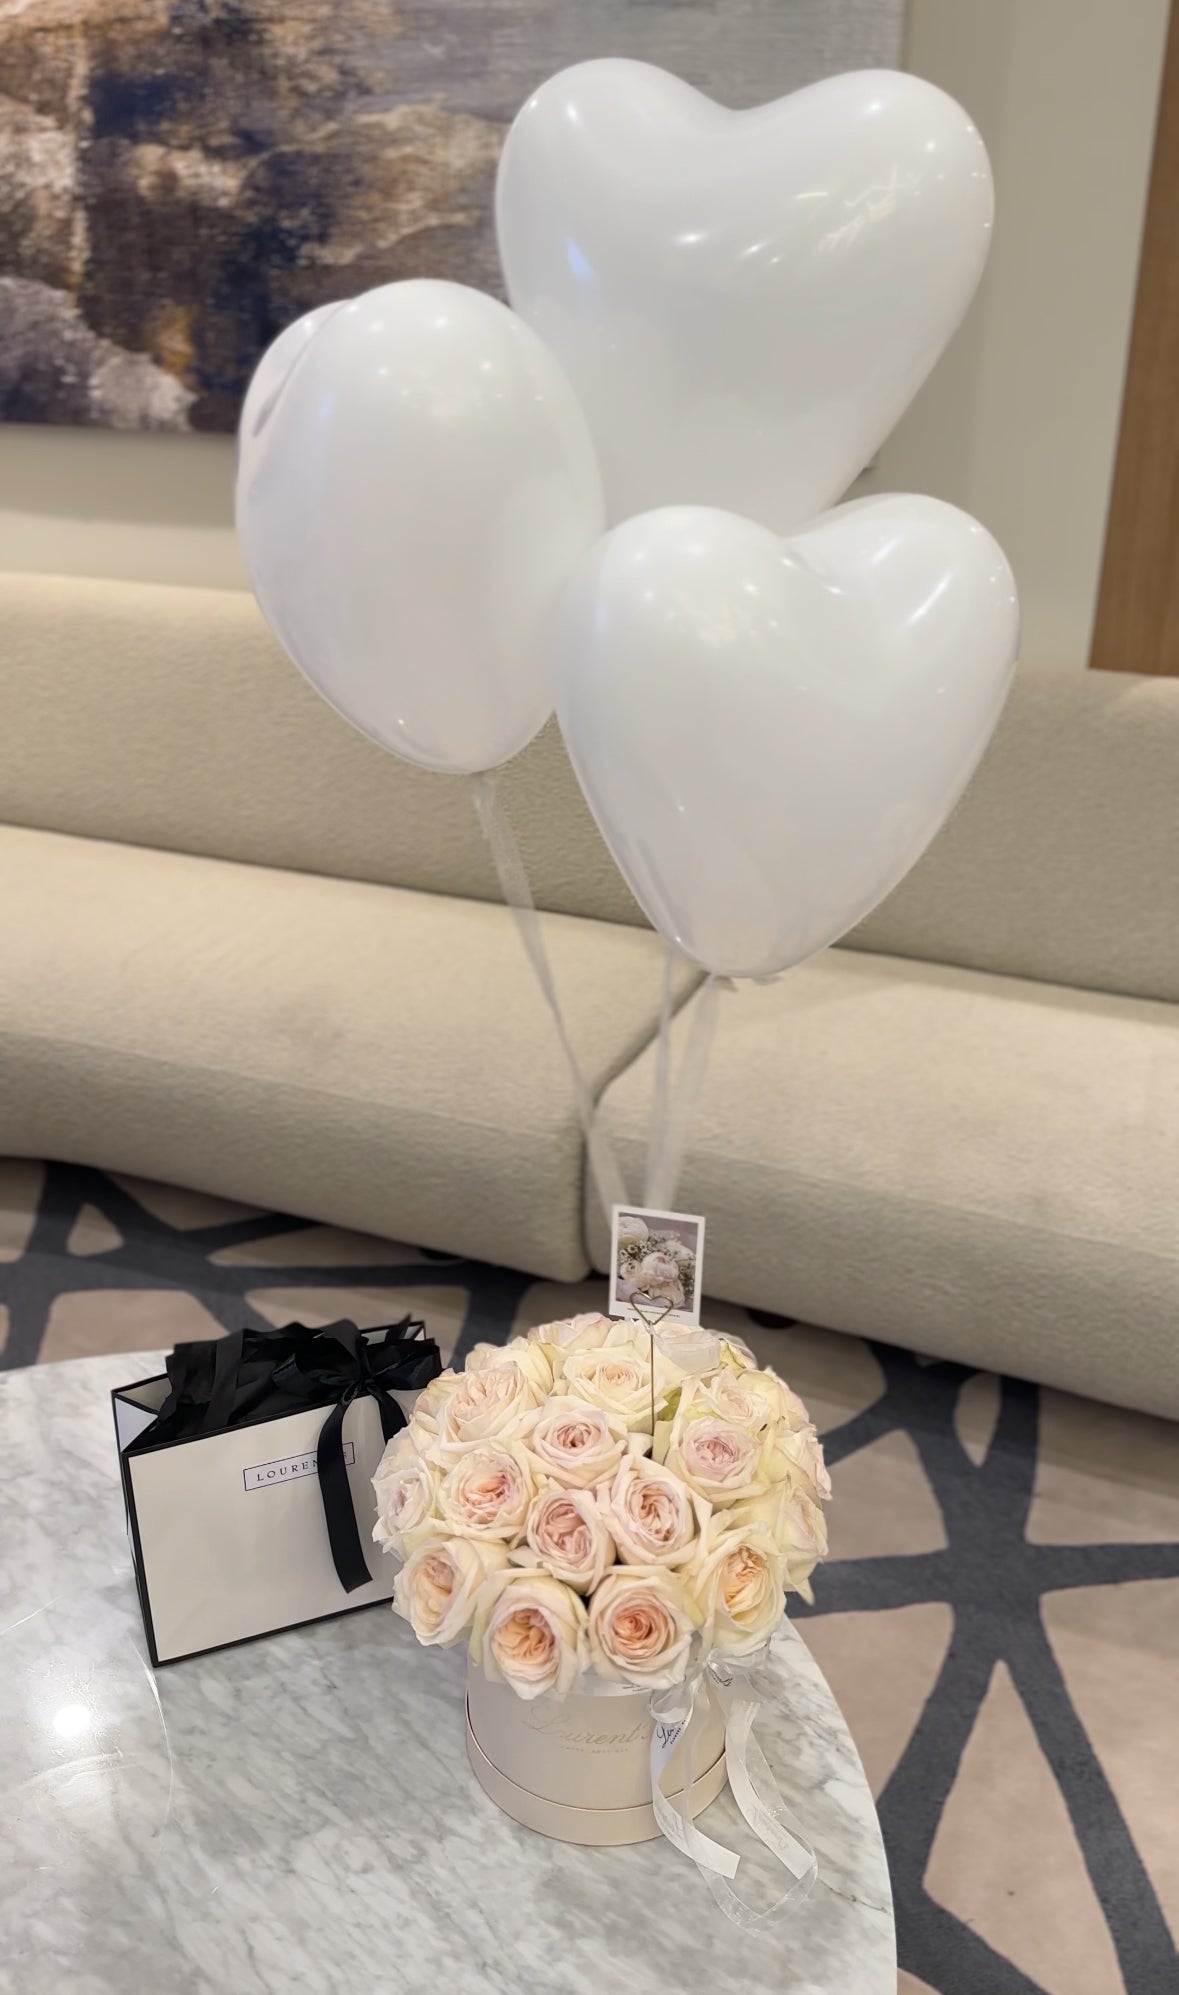 Flower Box + balloons+candle